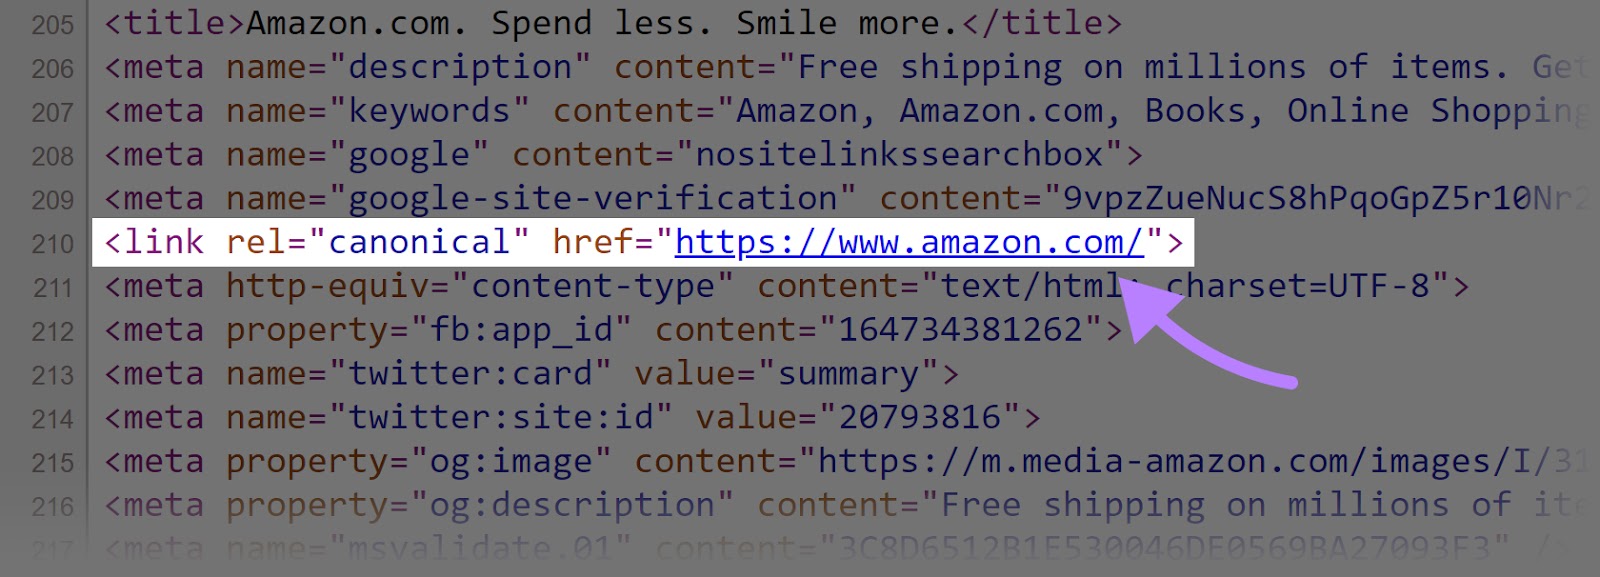 Canonical tag section of a website’s HTML code